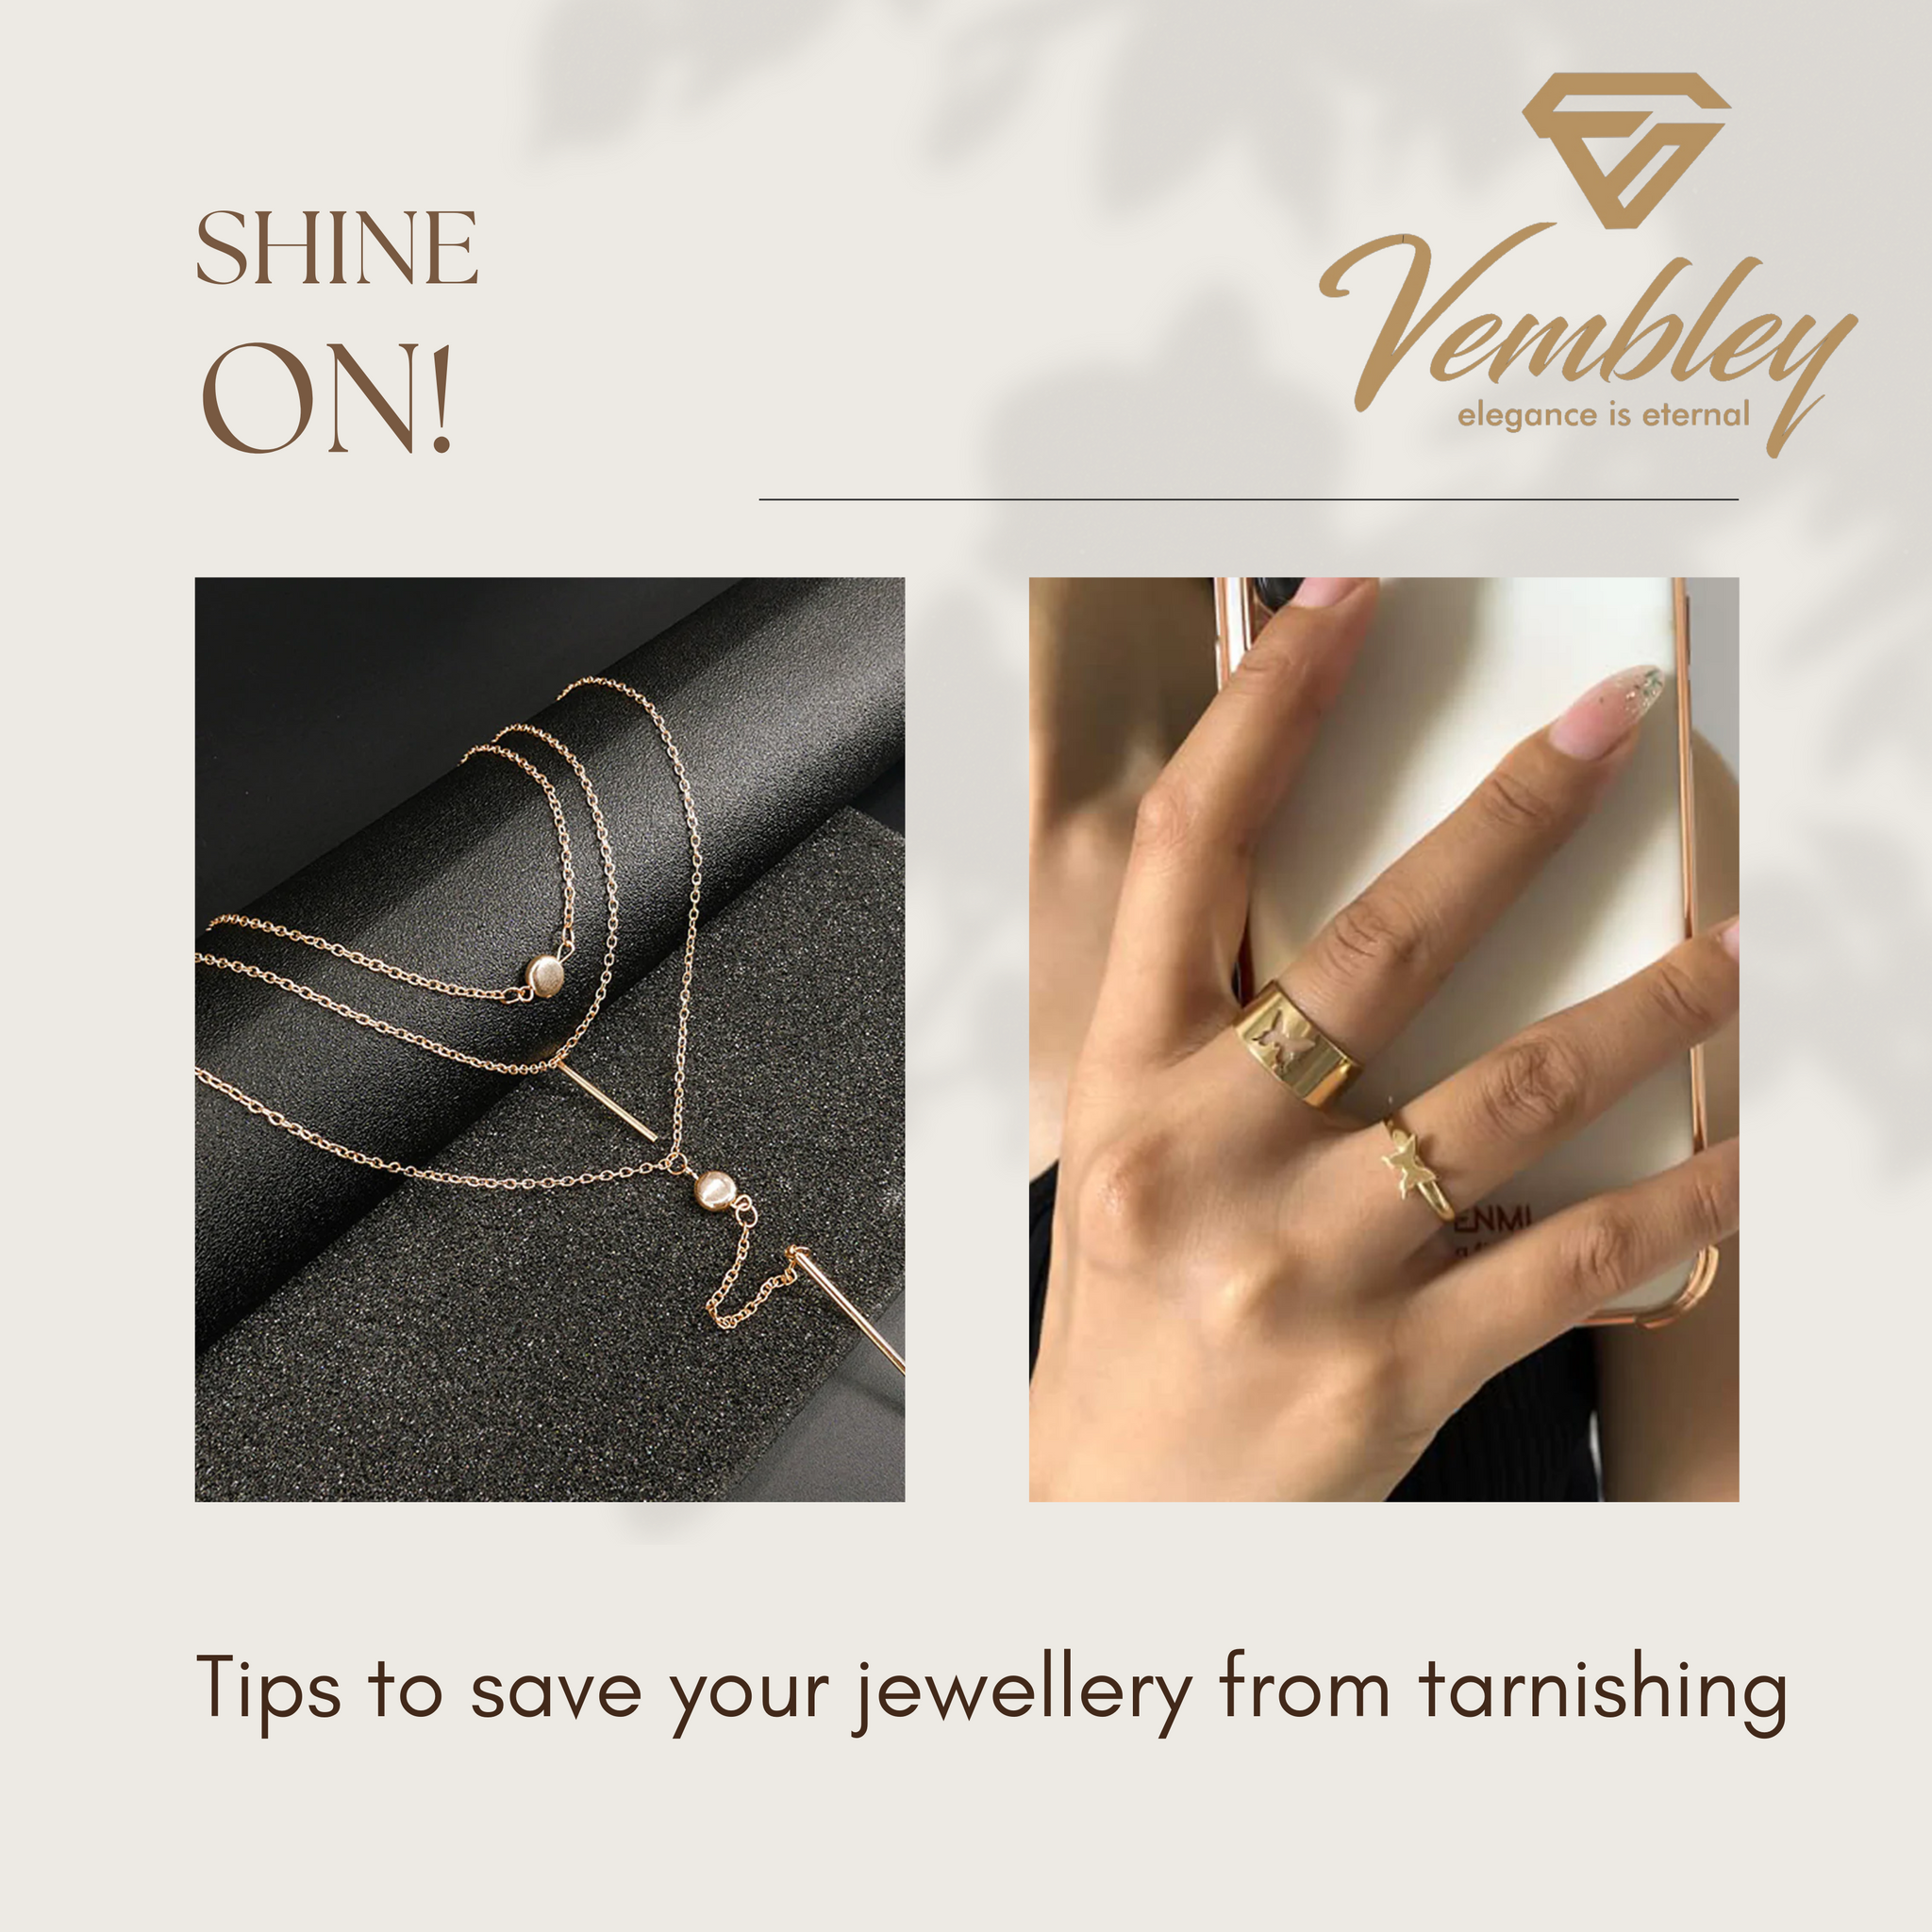 How to take care of your Jewellery by Vembley